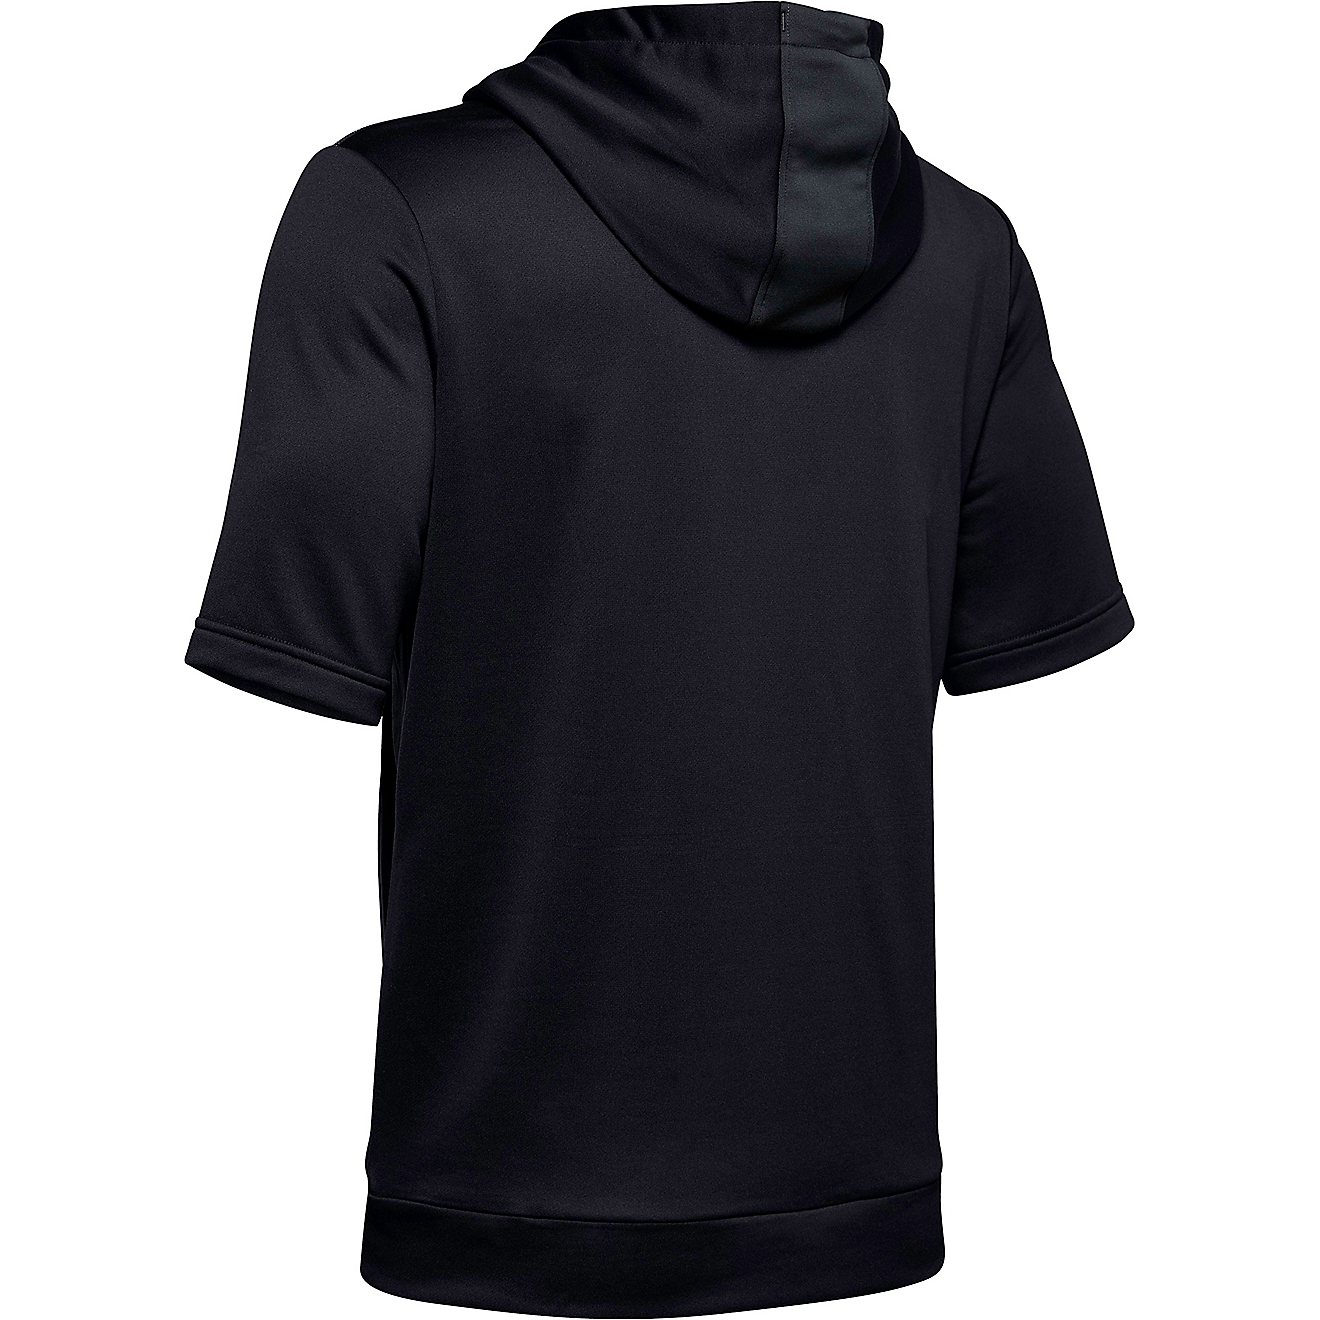 Under Armour Men's Utility Cage Short Sleeve Baseball Hoodie                                                                     - view number 2